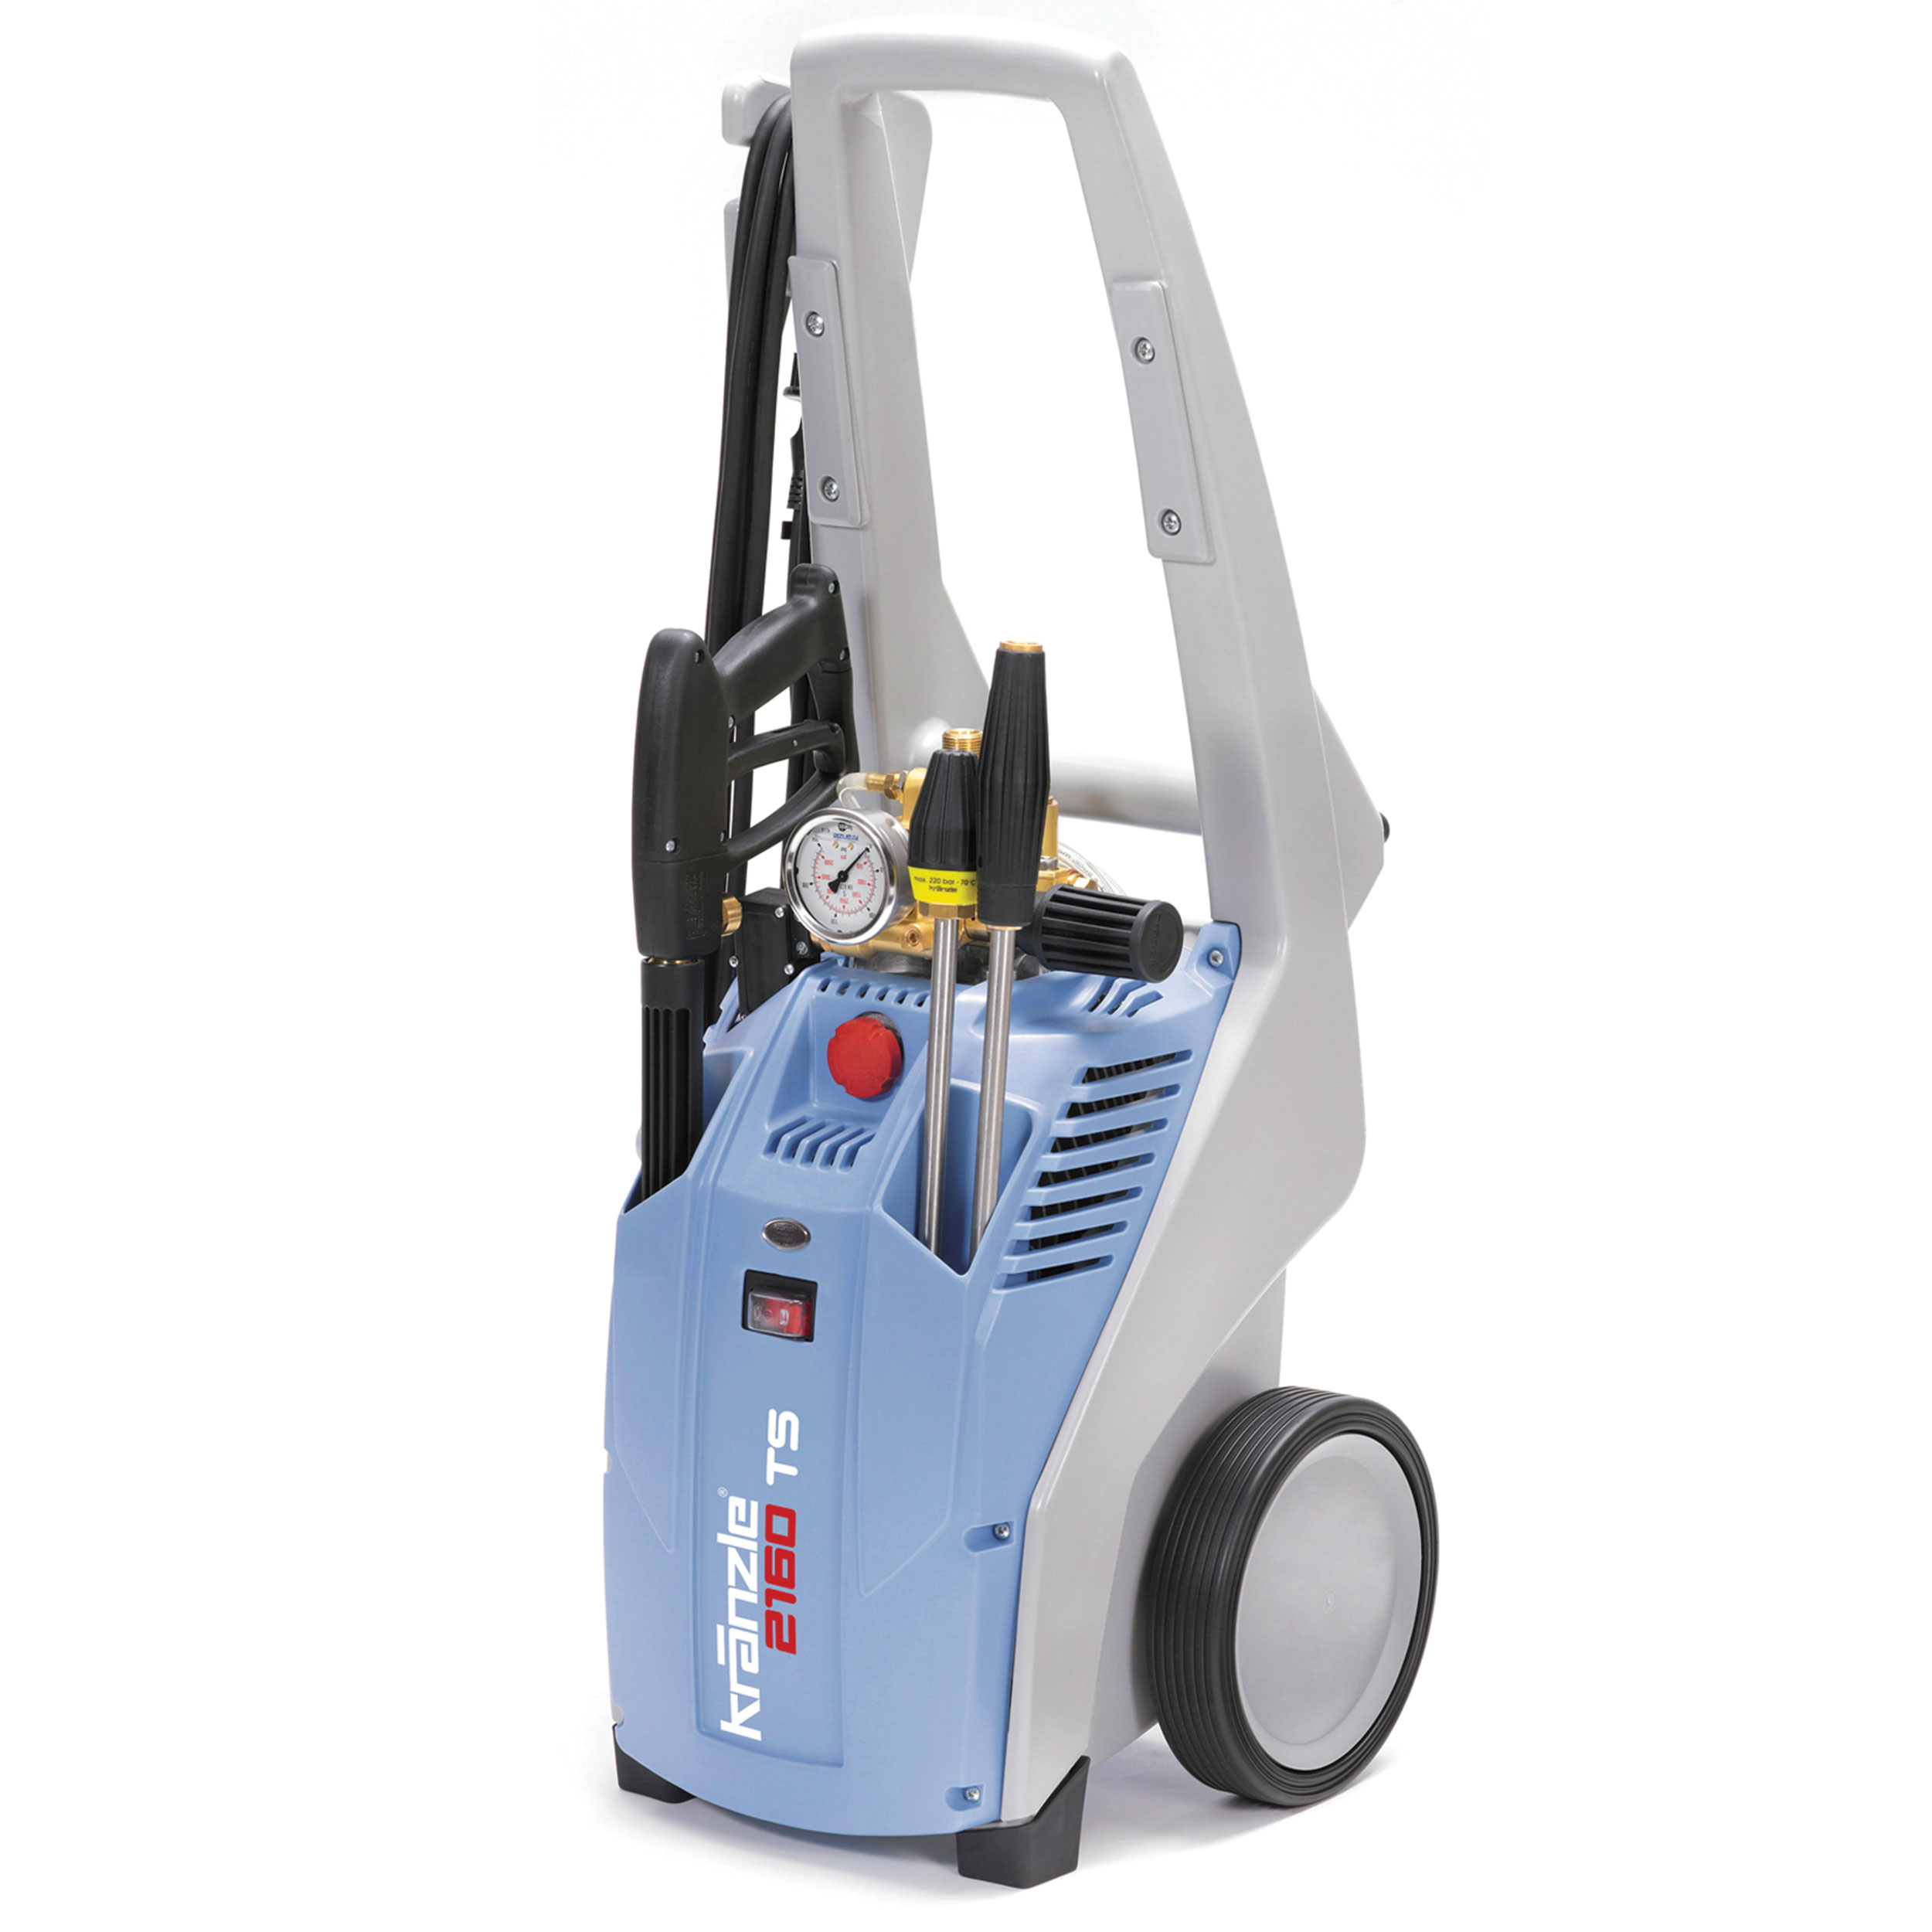 K2020 Pressure Washer, Cold Water, 110v, 20a, Gfi